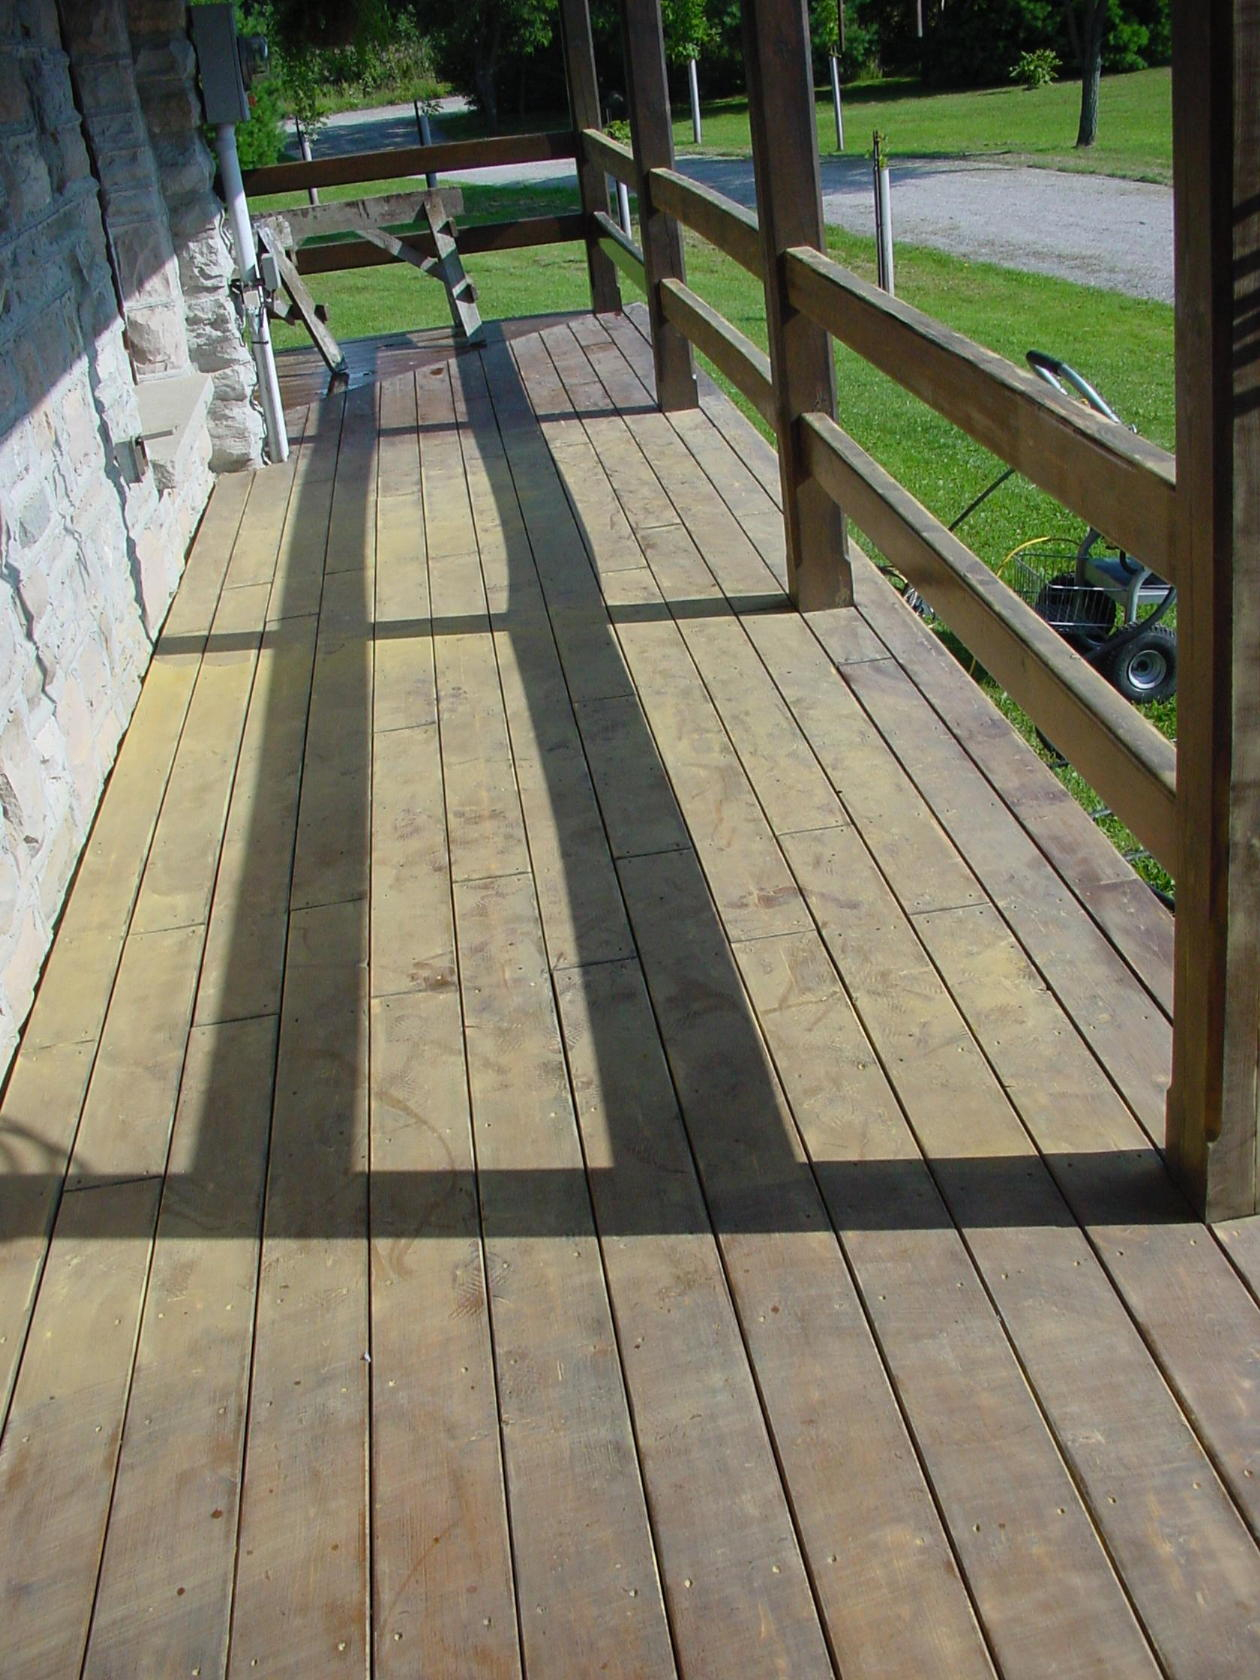 Deck Stain Why Most People Mess Up Their Deck Big Time intended for sizing 1260 X 1680